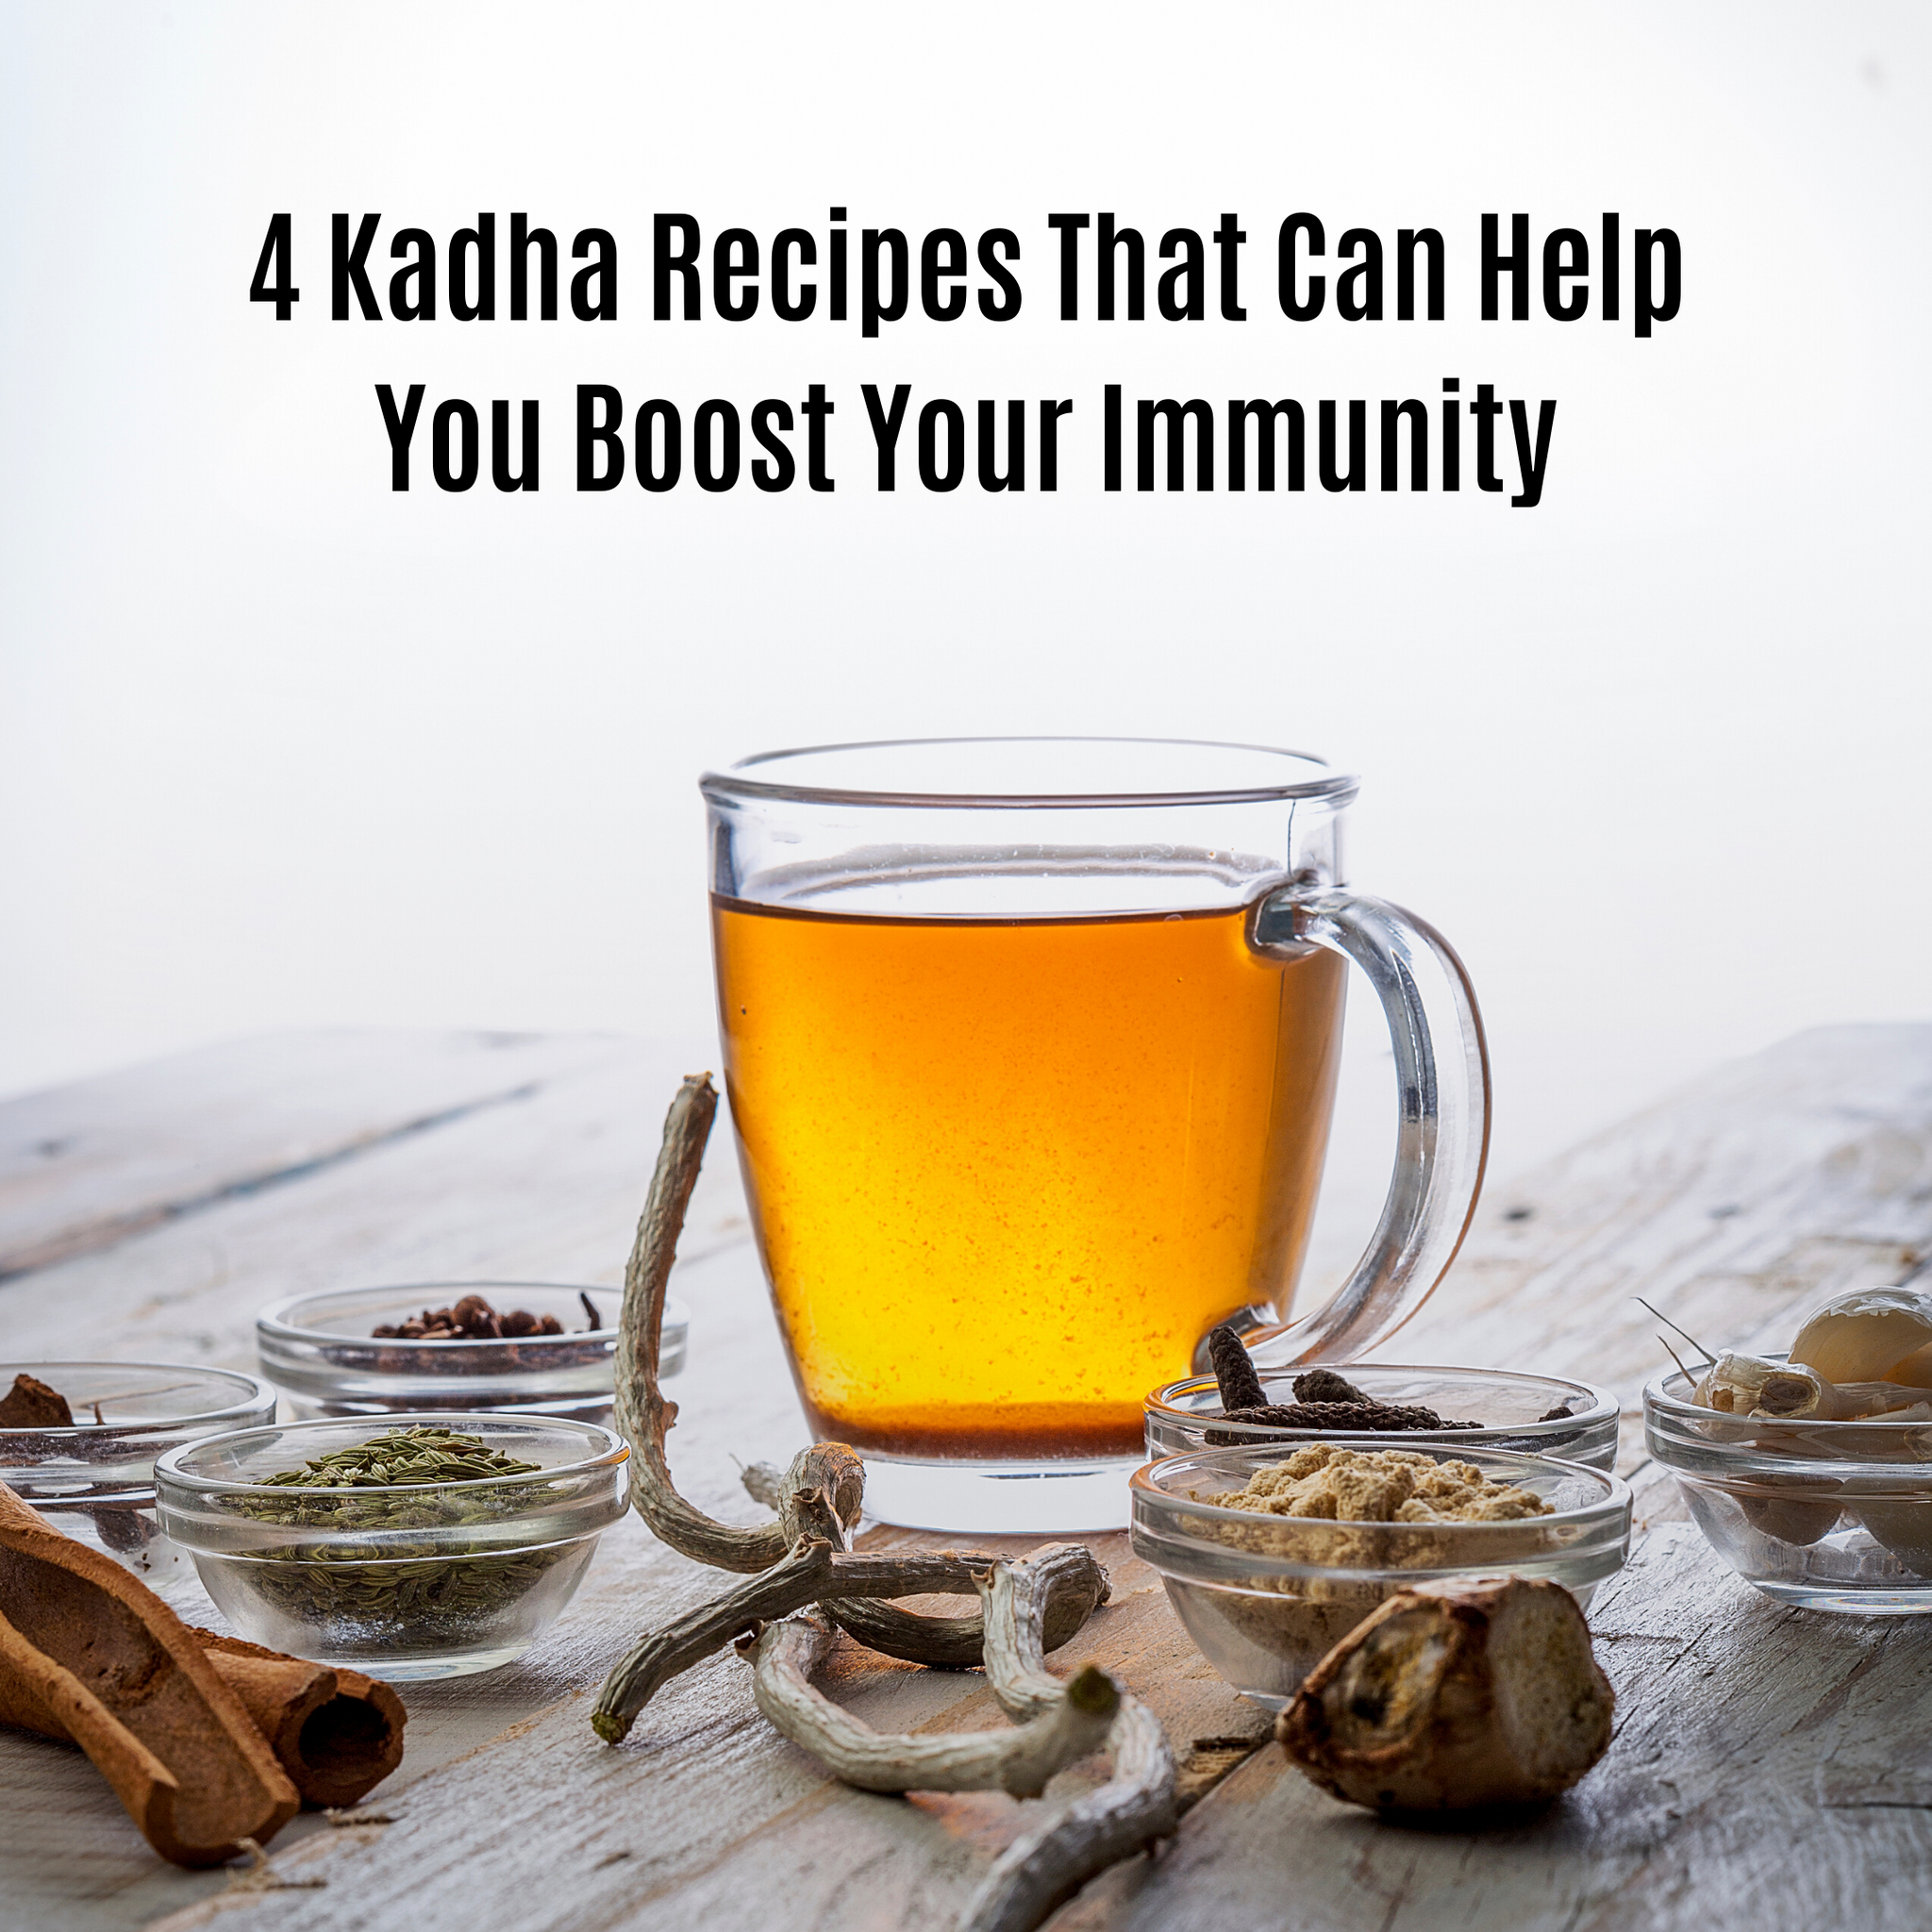 4 Kadha Recipes That Can Help You Boost Your Immunity